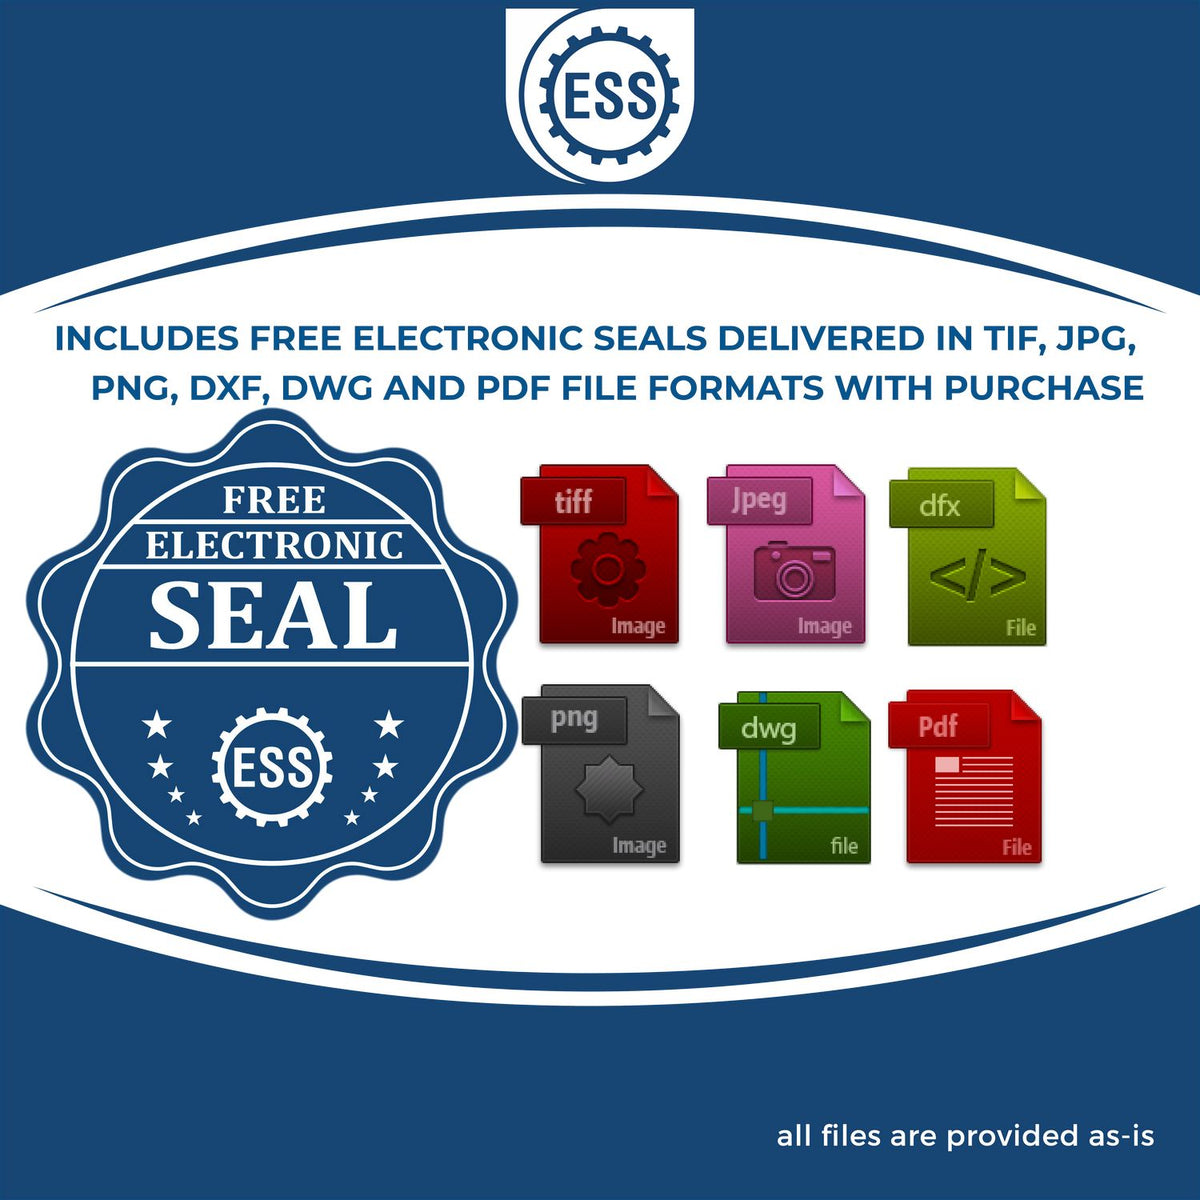 An infographic for the free electronic seal for the Self-Inking Tennessee Geologist Stamp illustrating the different file type icons such as DXF, DWG, TIF, JPG and PNG.